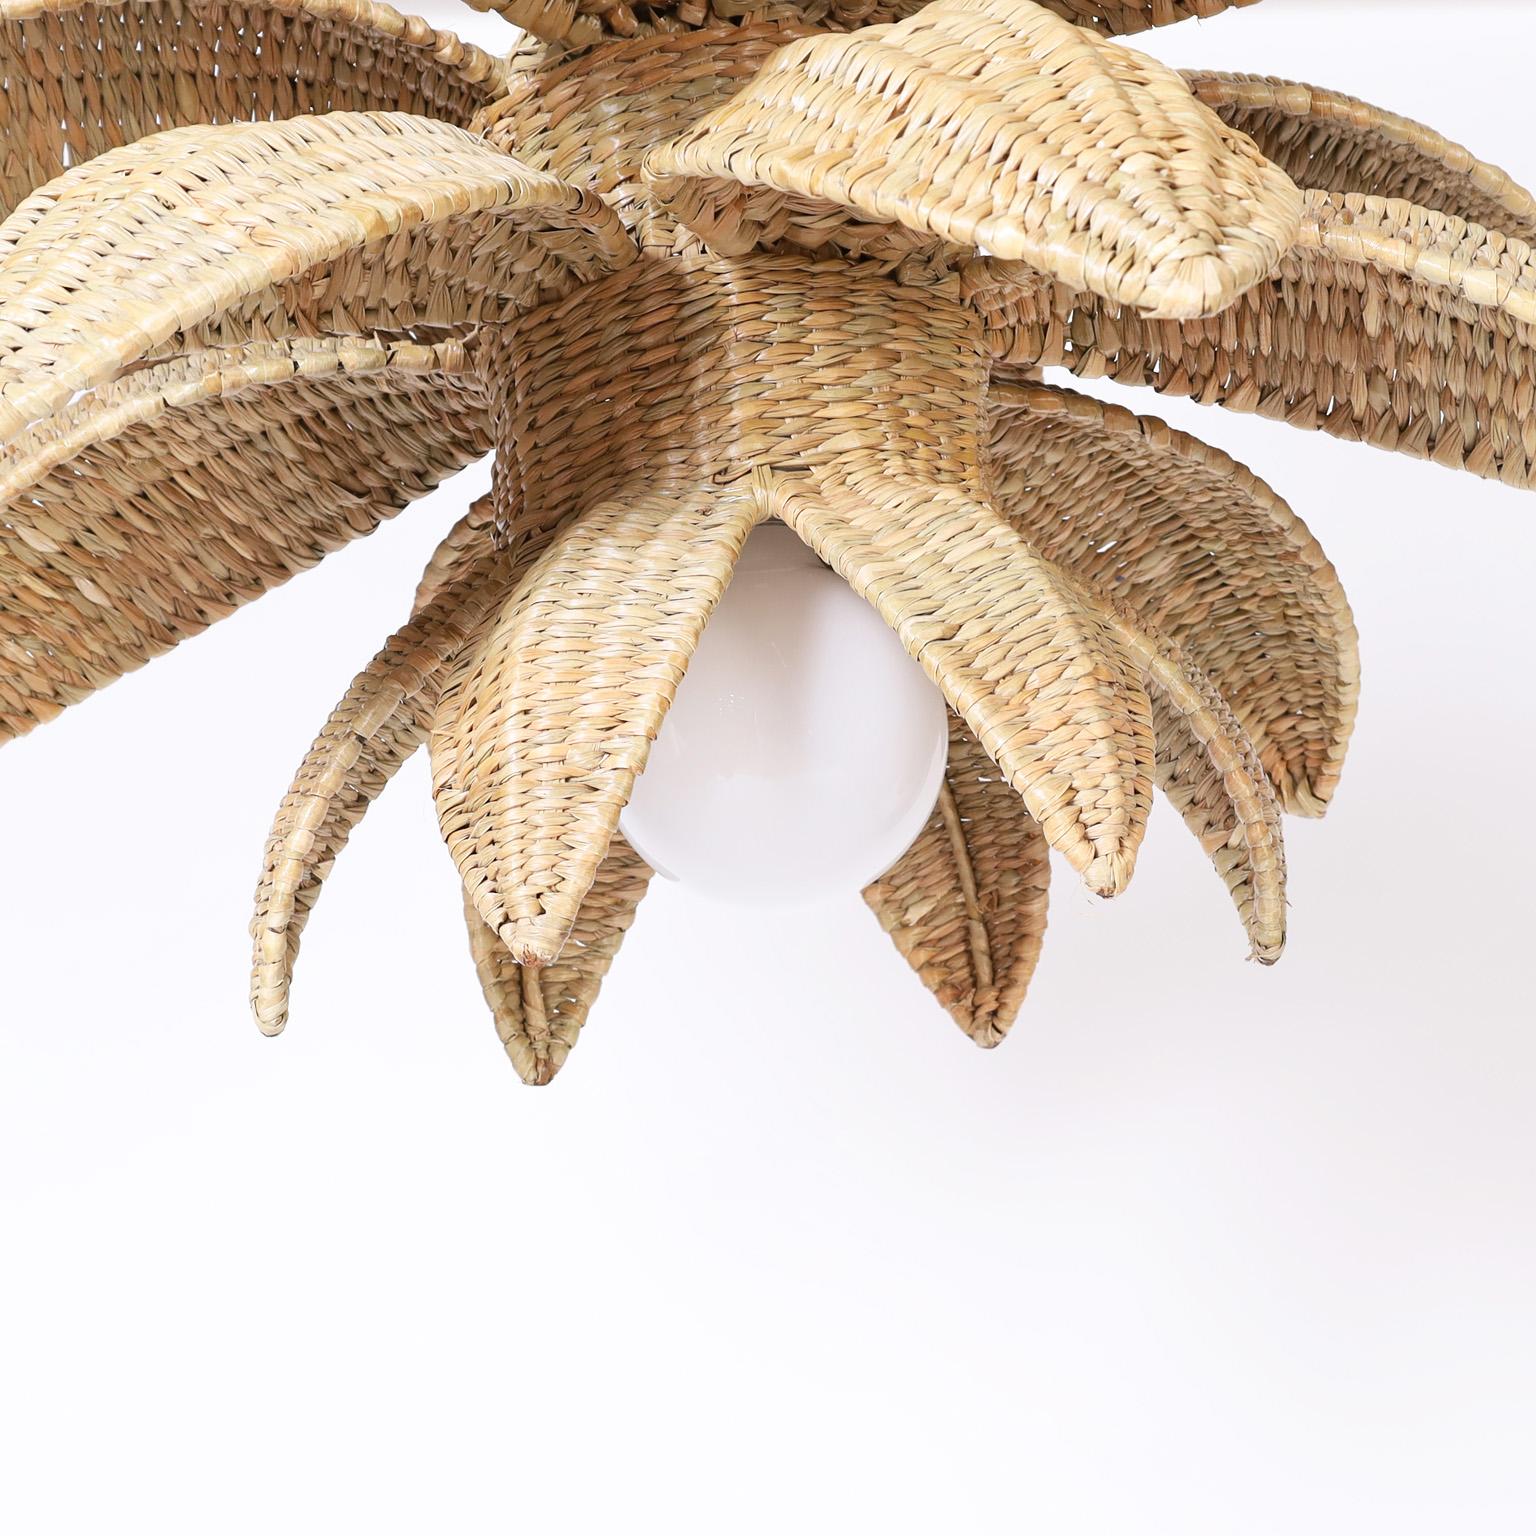 Hand-Woven Wicker Palm Leaf or Lotus Pendant from the FS Flores Collection